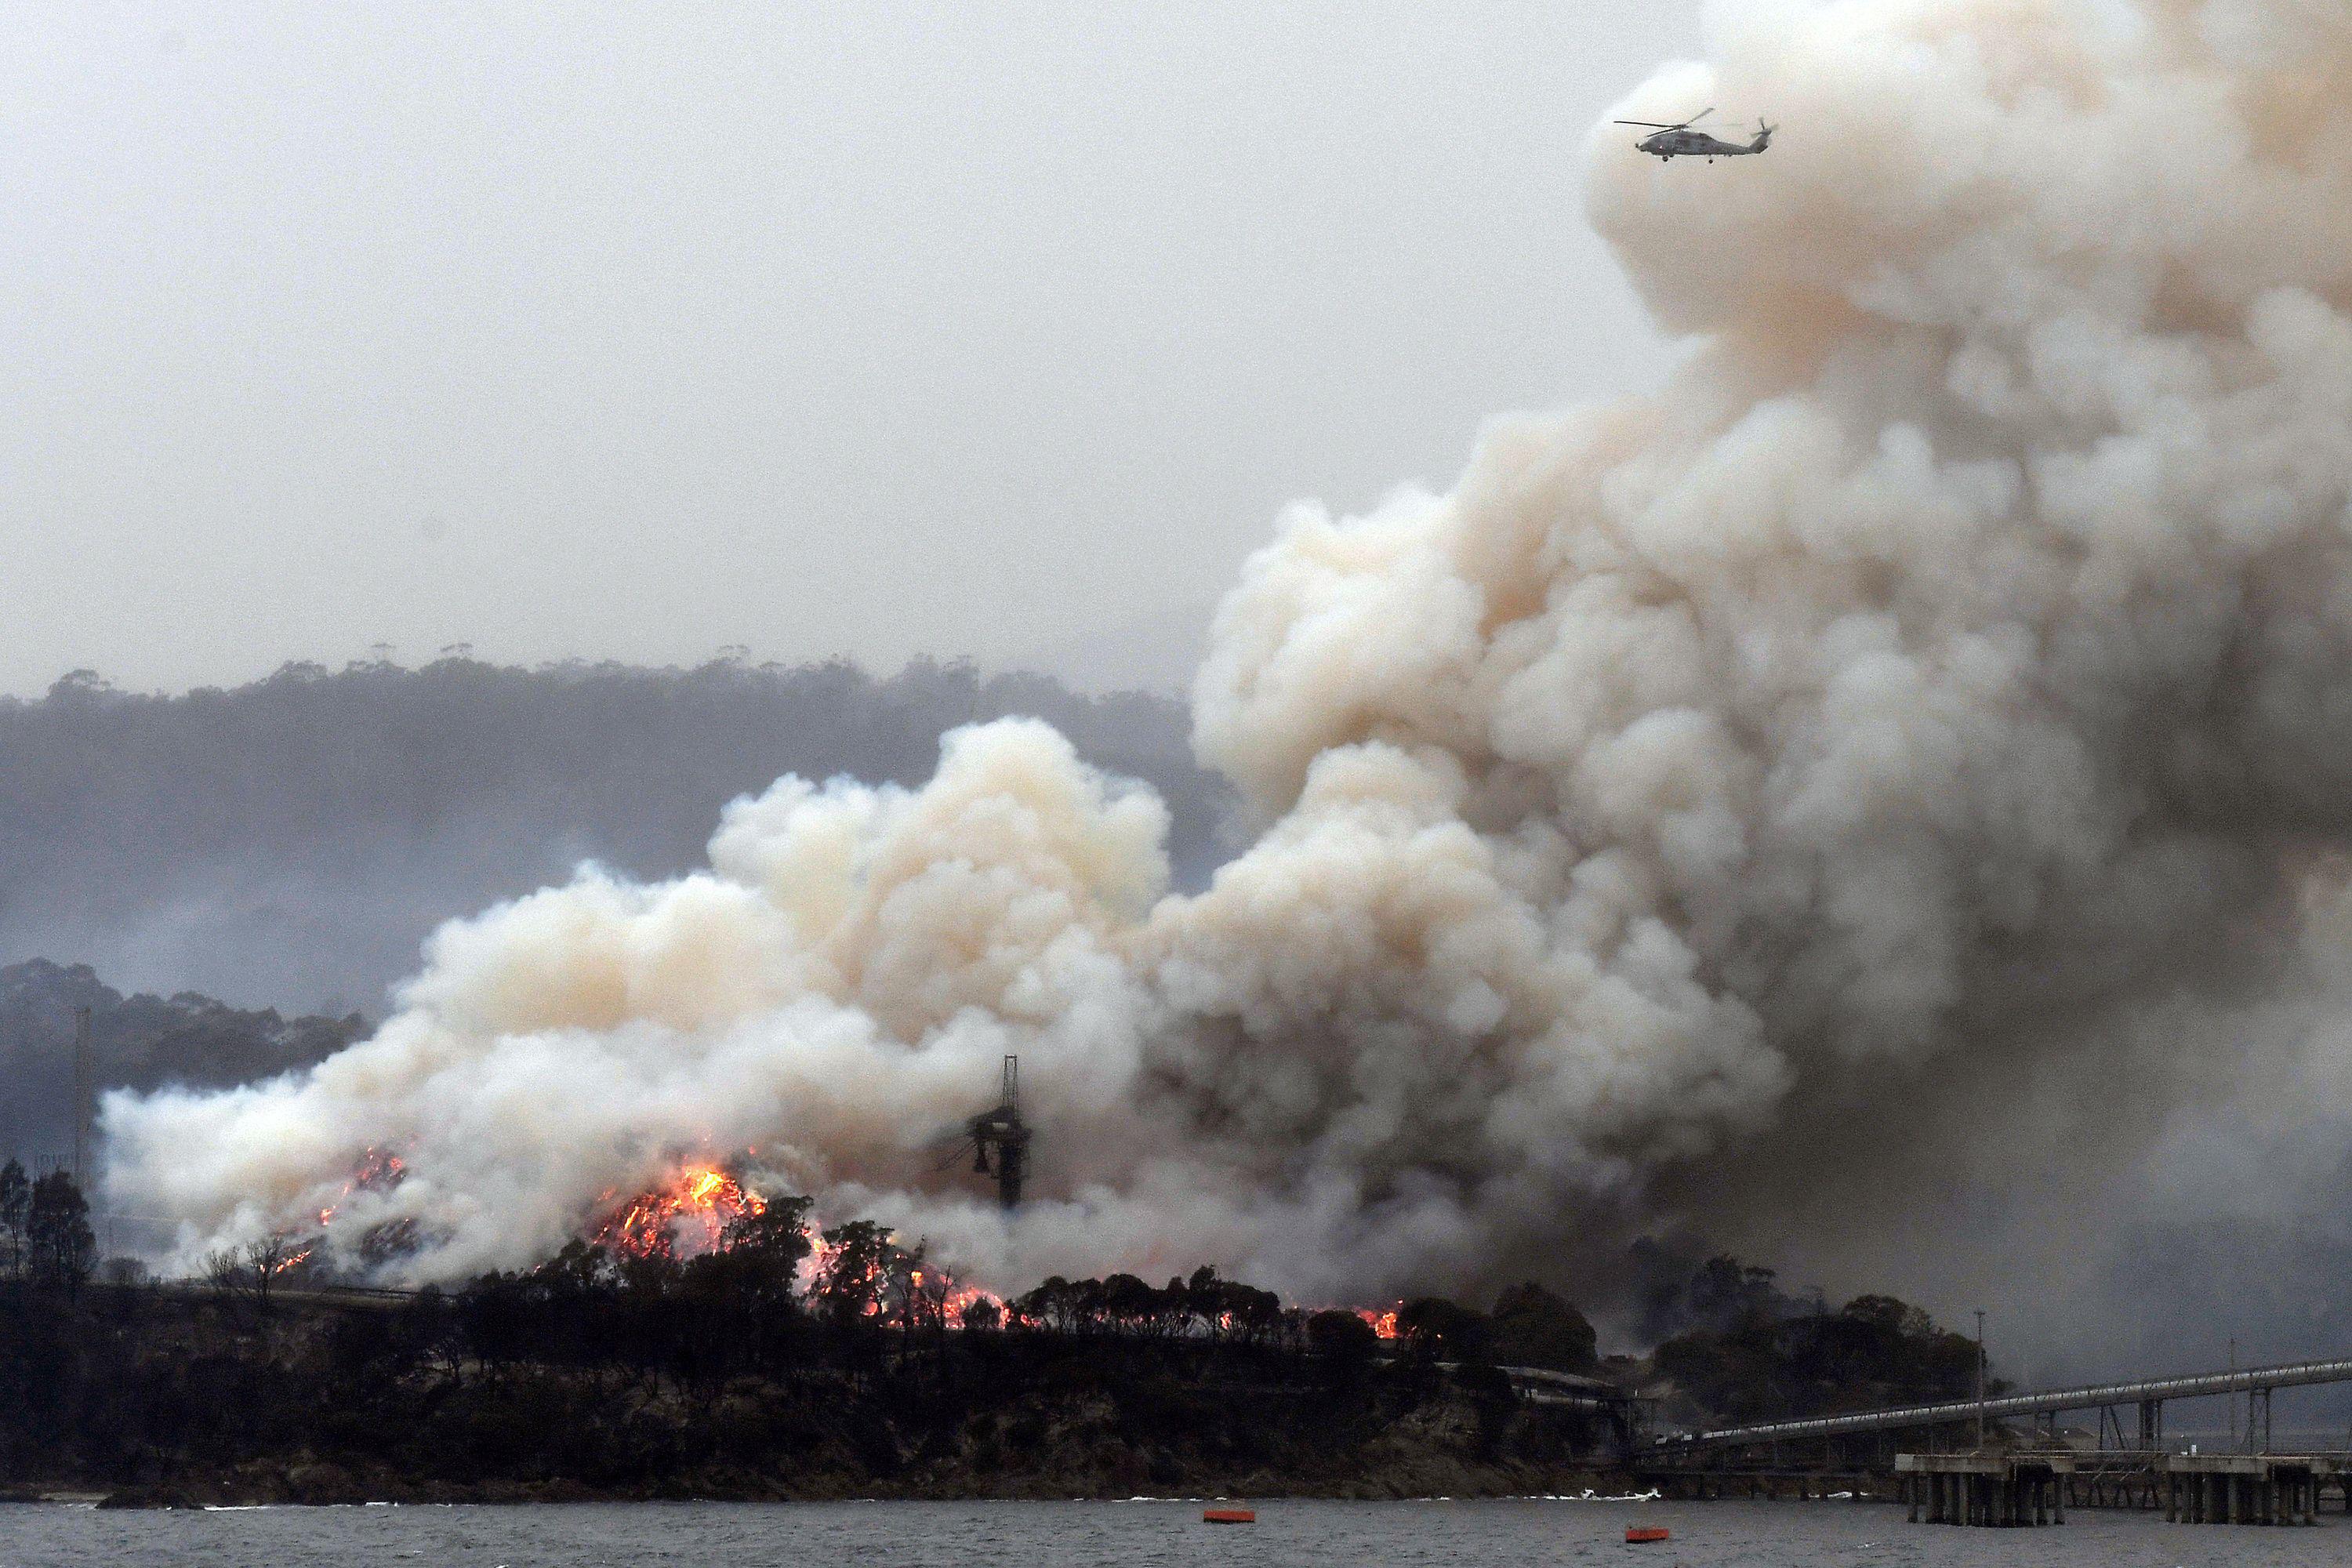 A helicopter is seen flying above a thick cloud of smoke stemming from a large coastal fire.